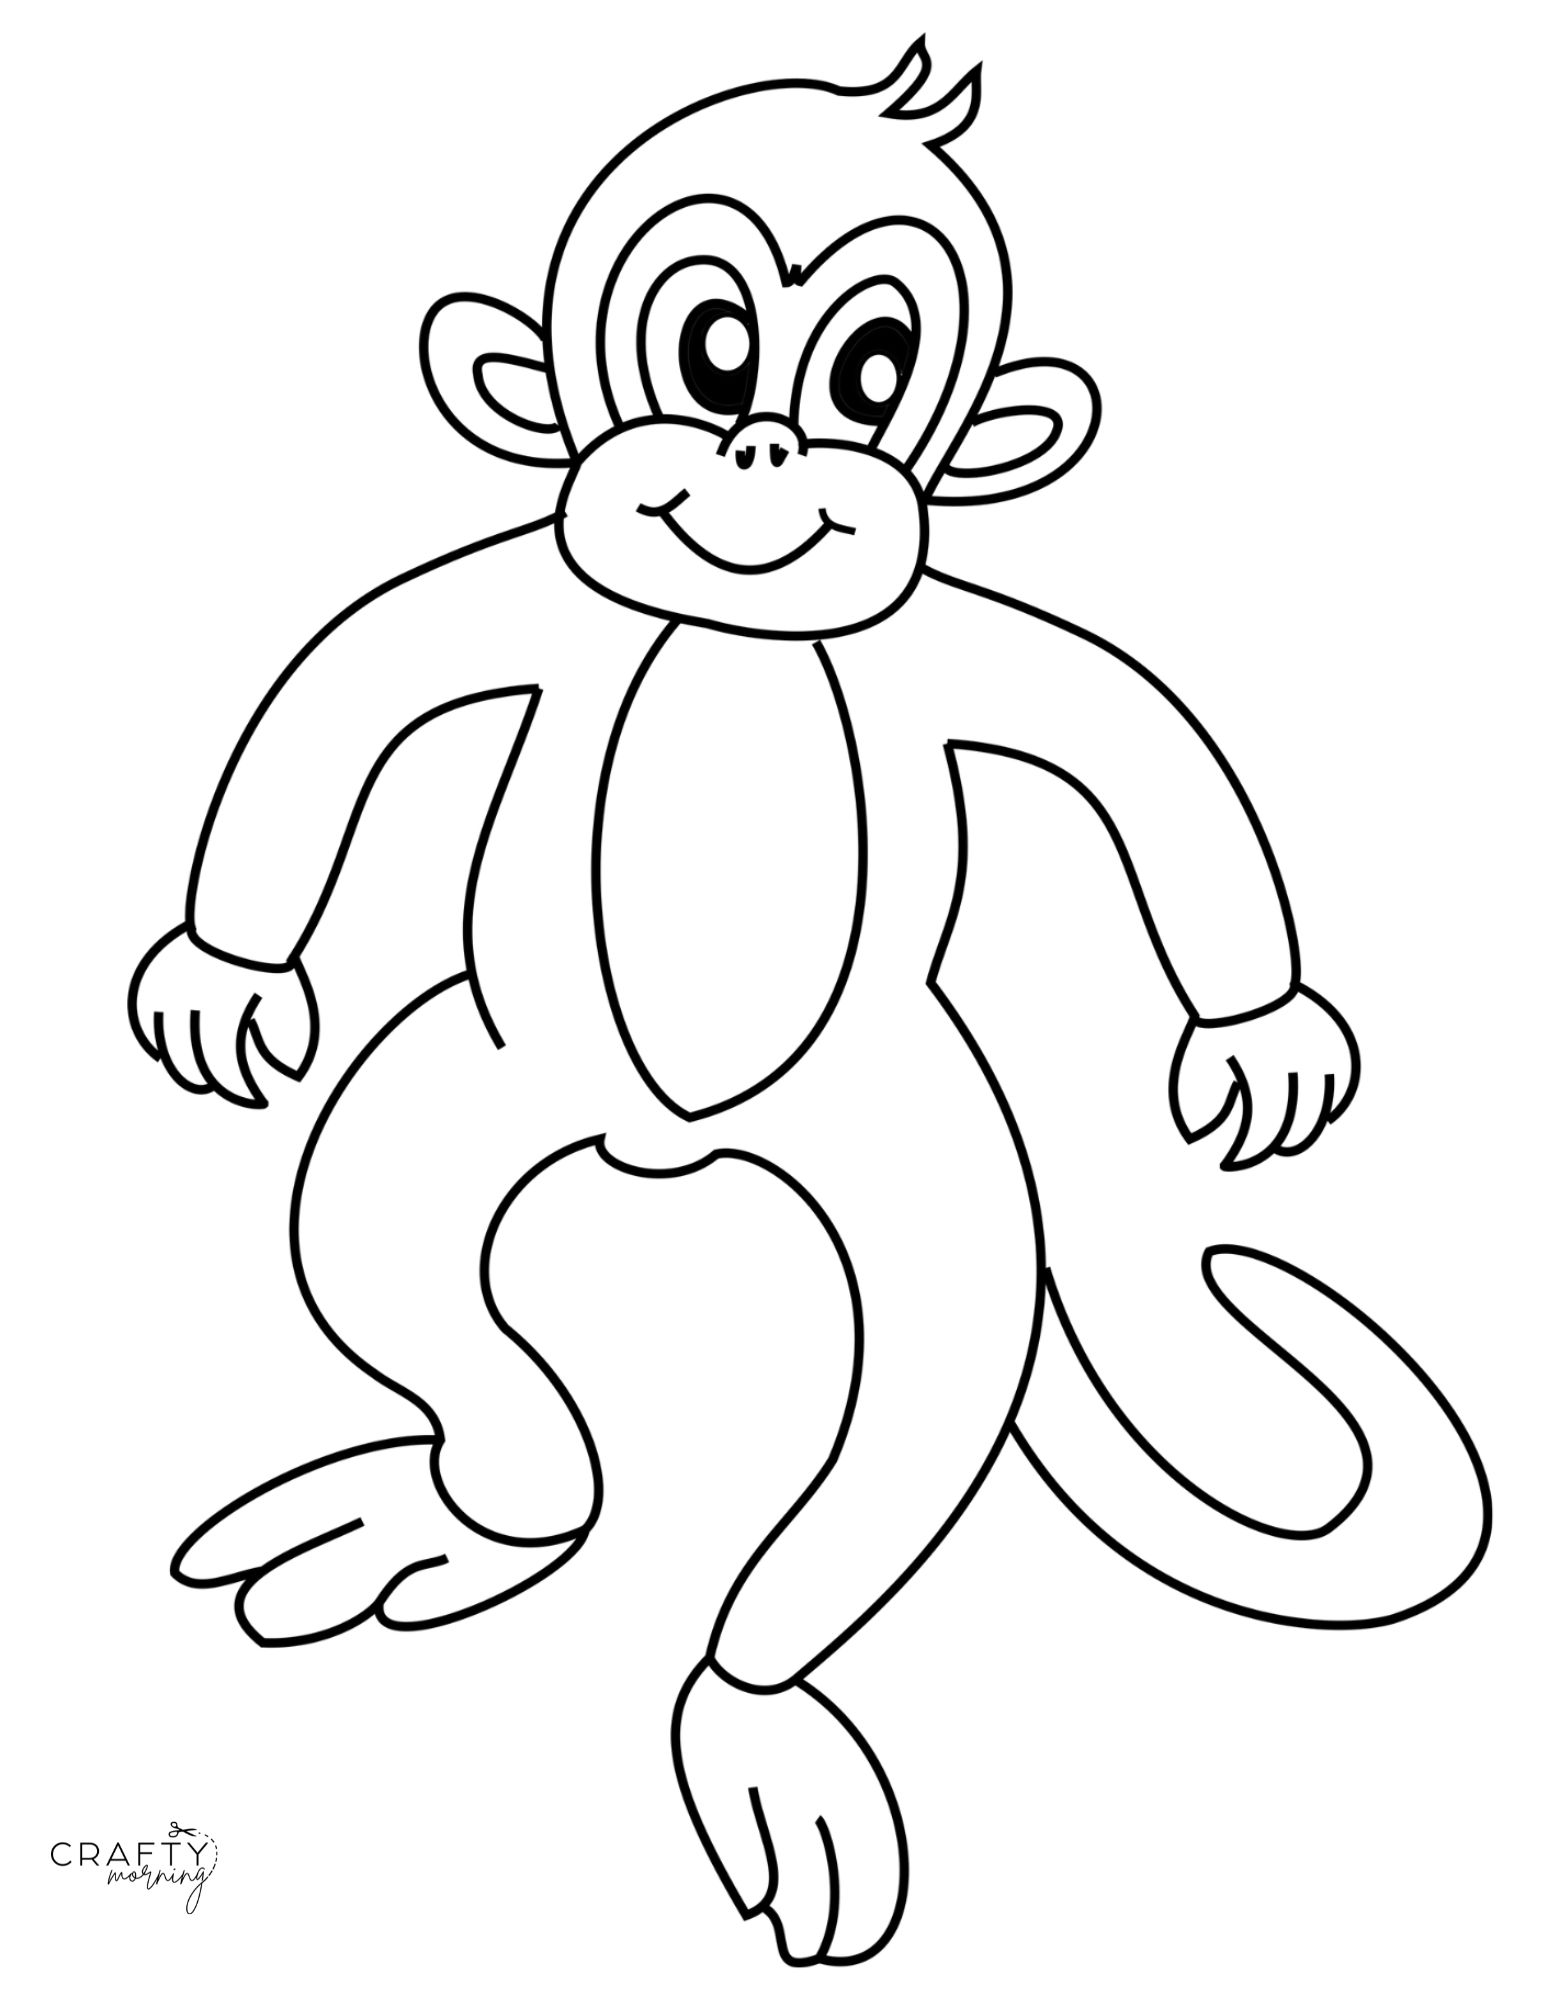 easy monkey drawing step by step 1